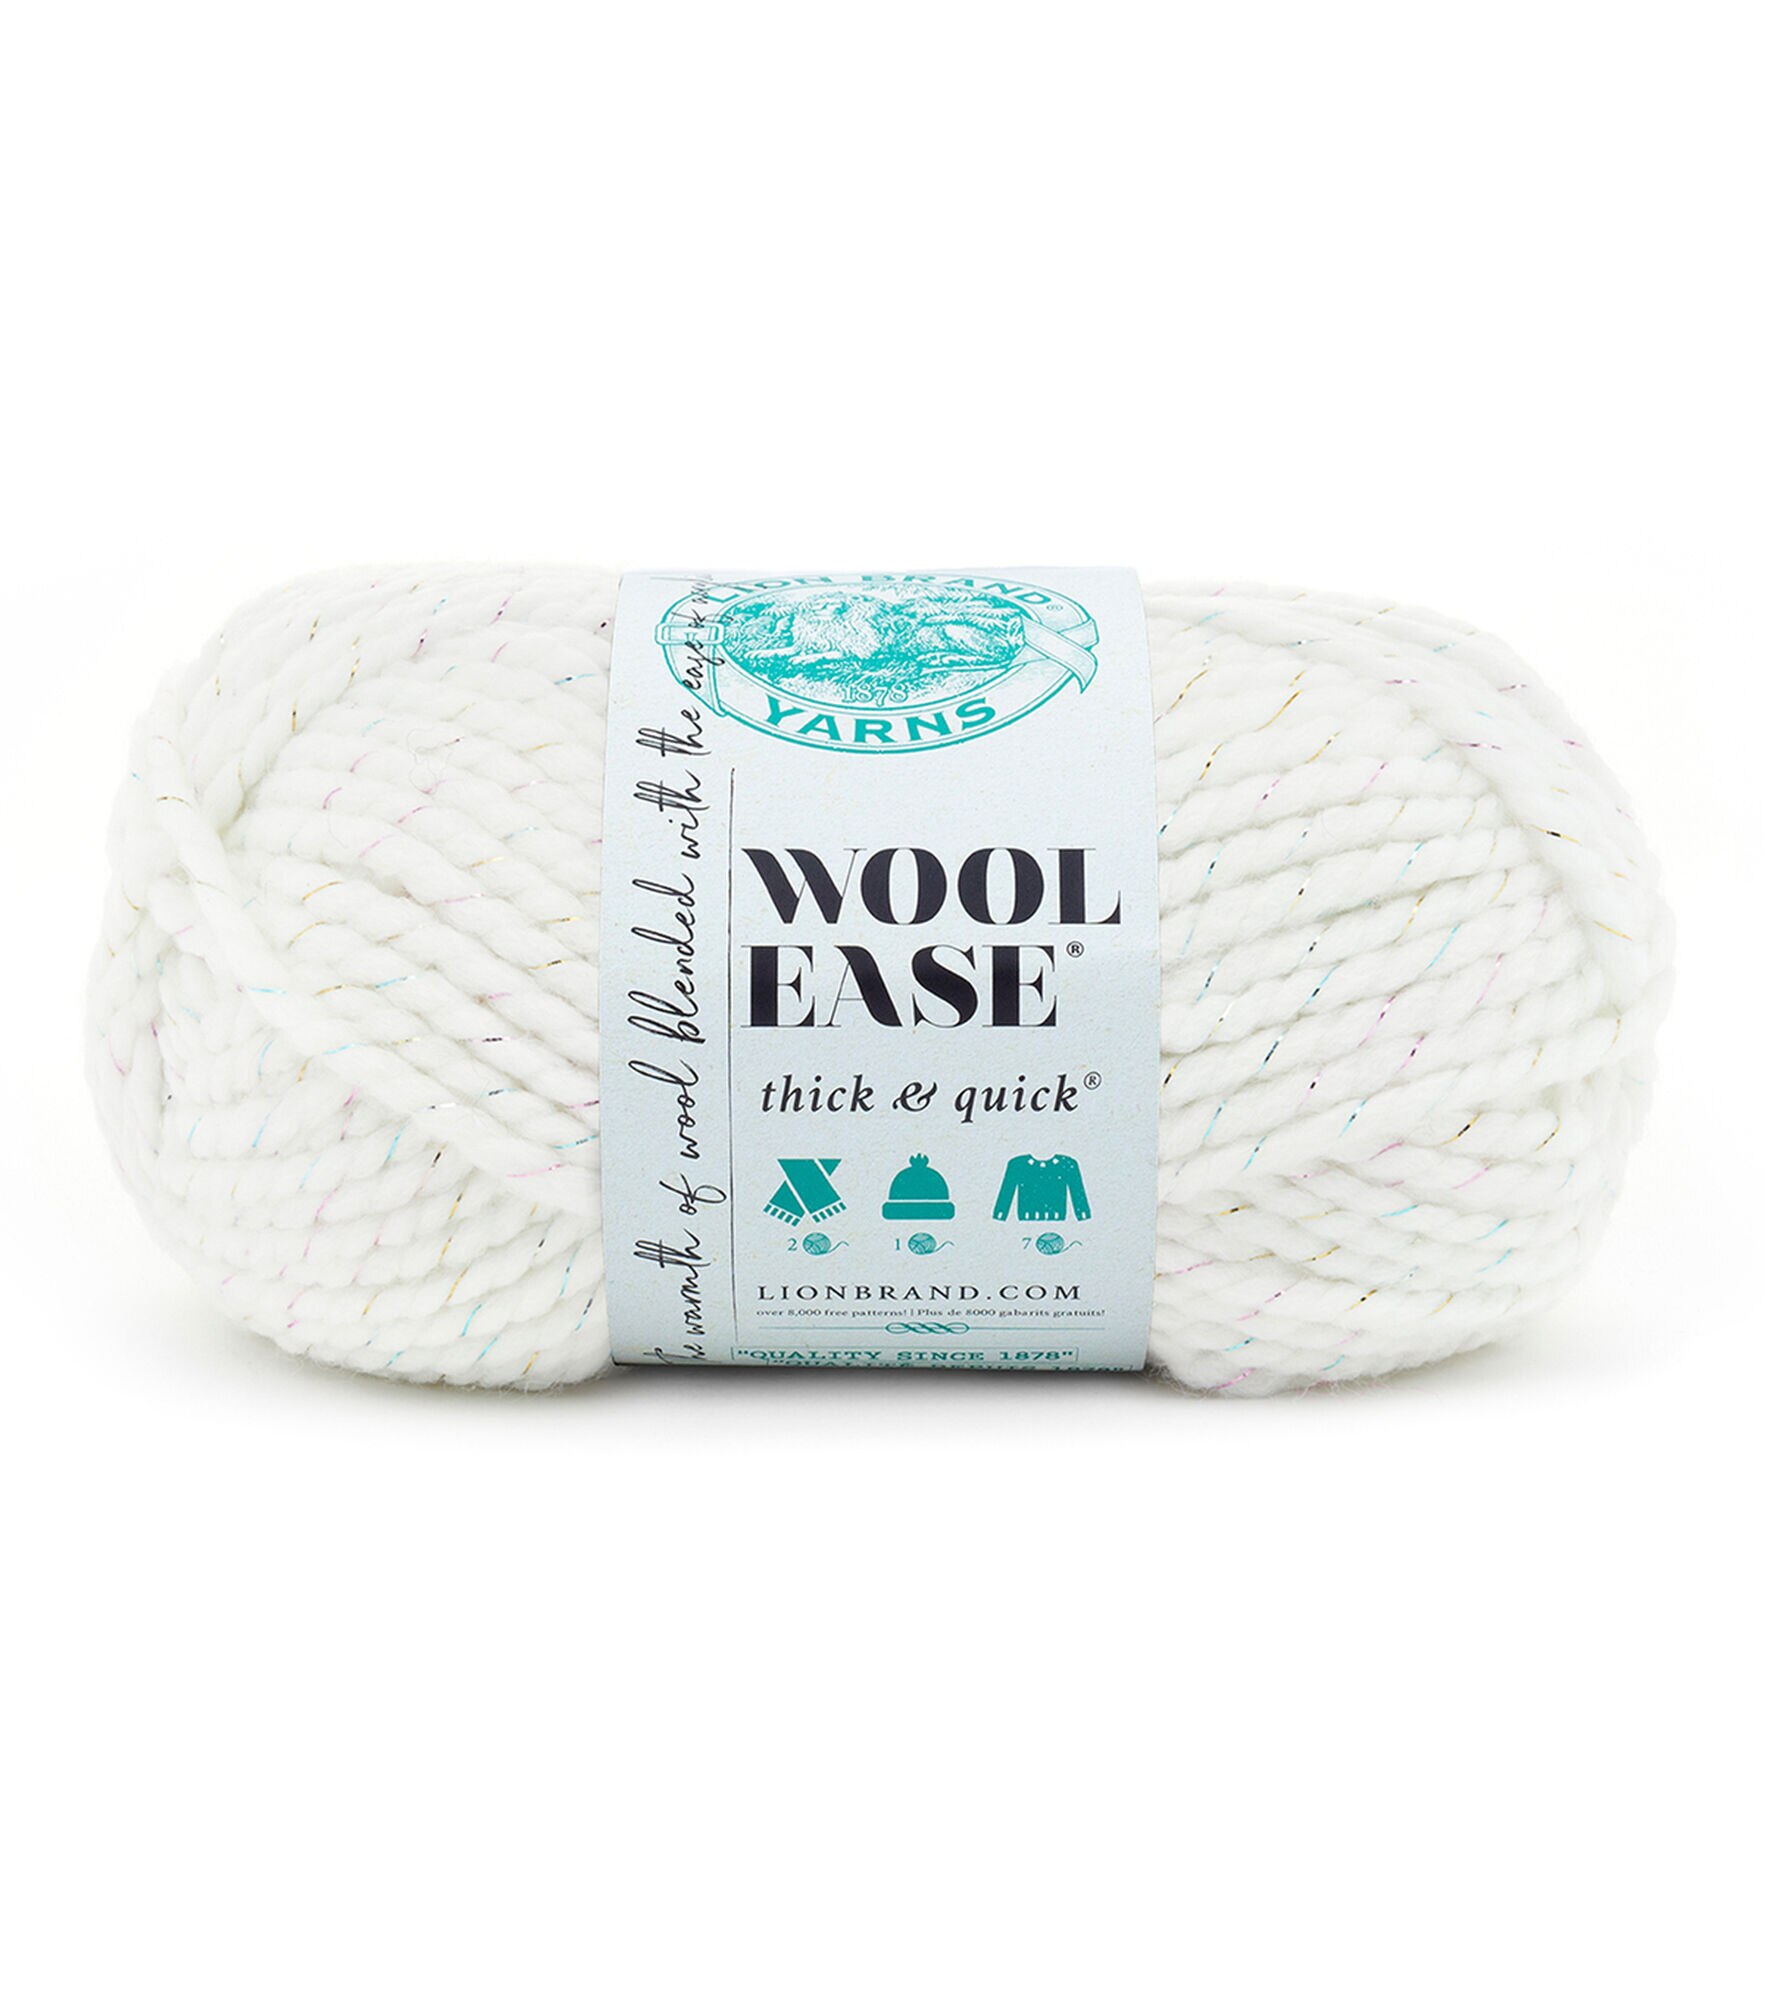 Lion Brand Yarn Wool-Ease Thick & Quick Yarn, Soft and Bulky Yarn for  Knitting, Crocheting, and Crafting, 1 Skein, Fossil